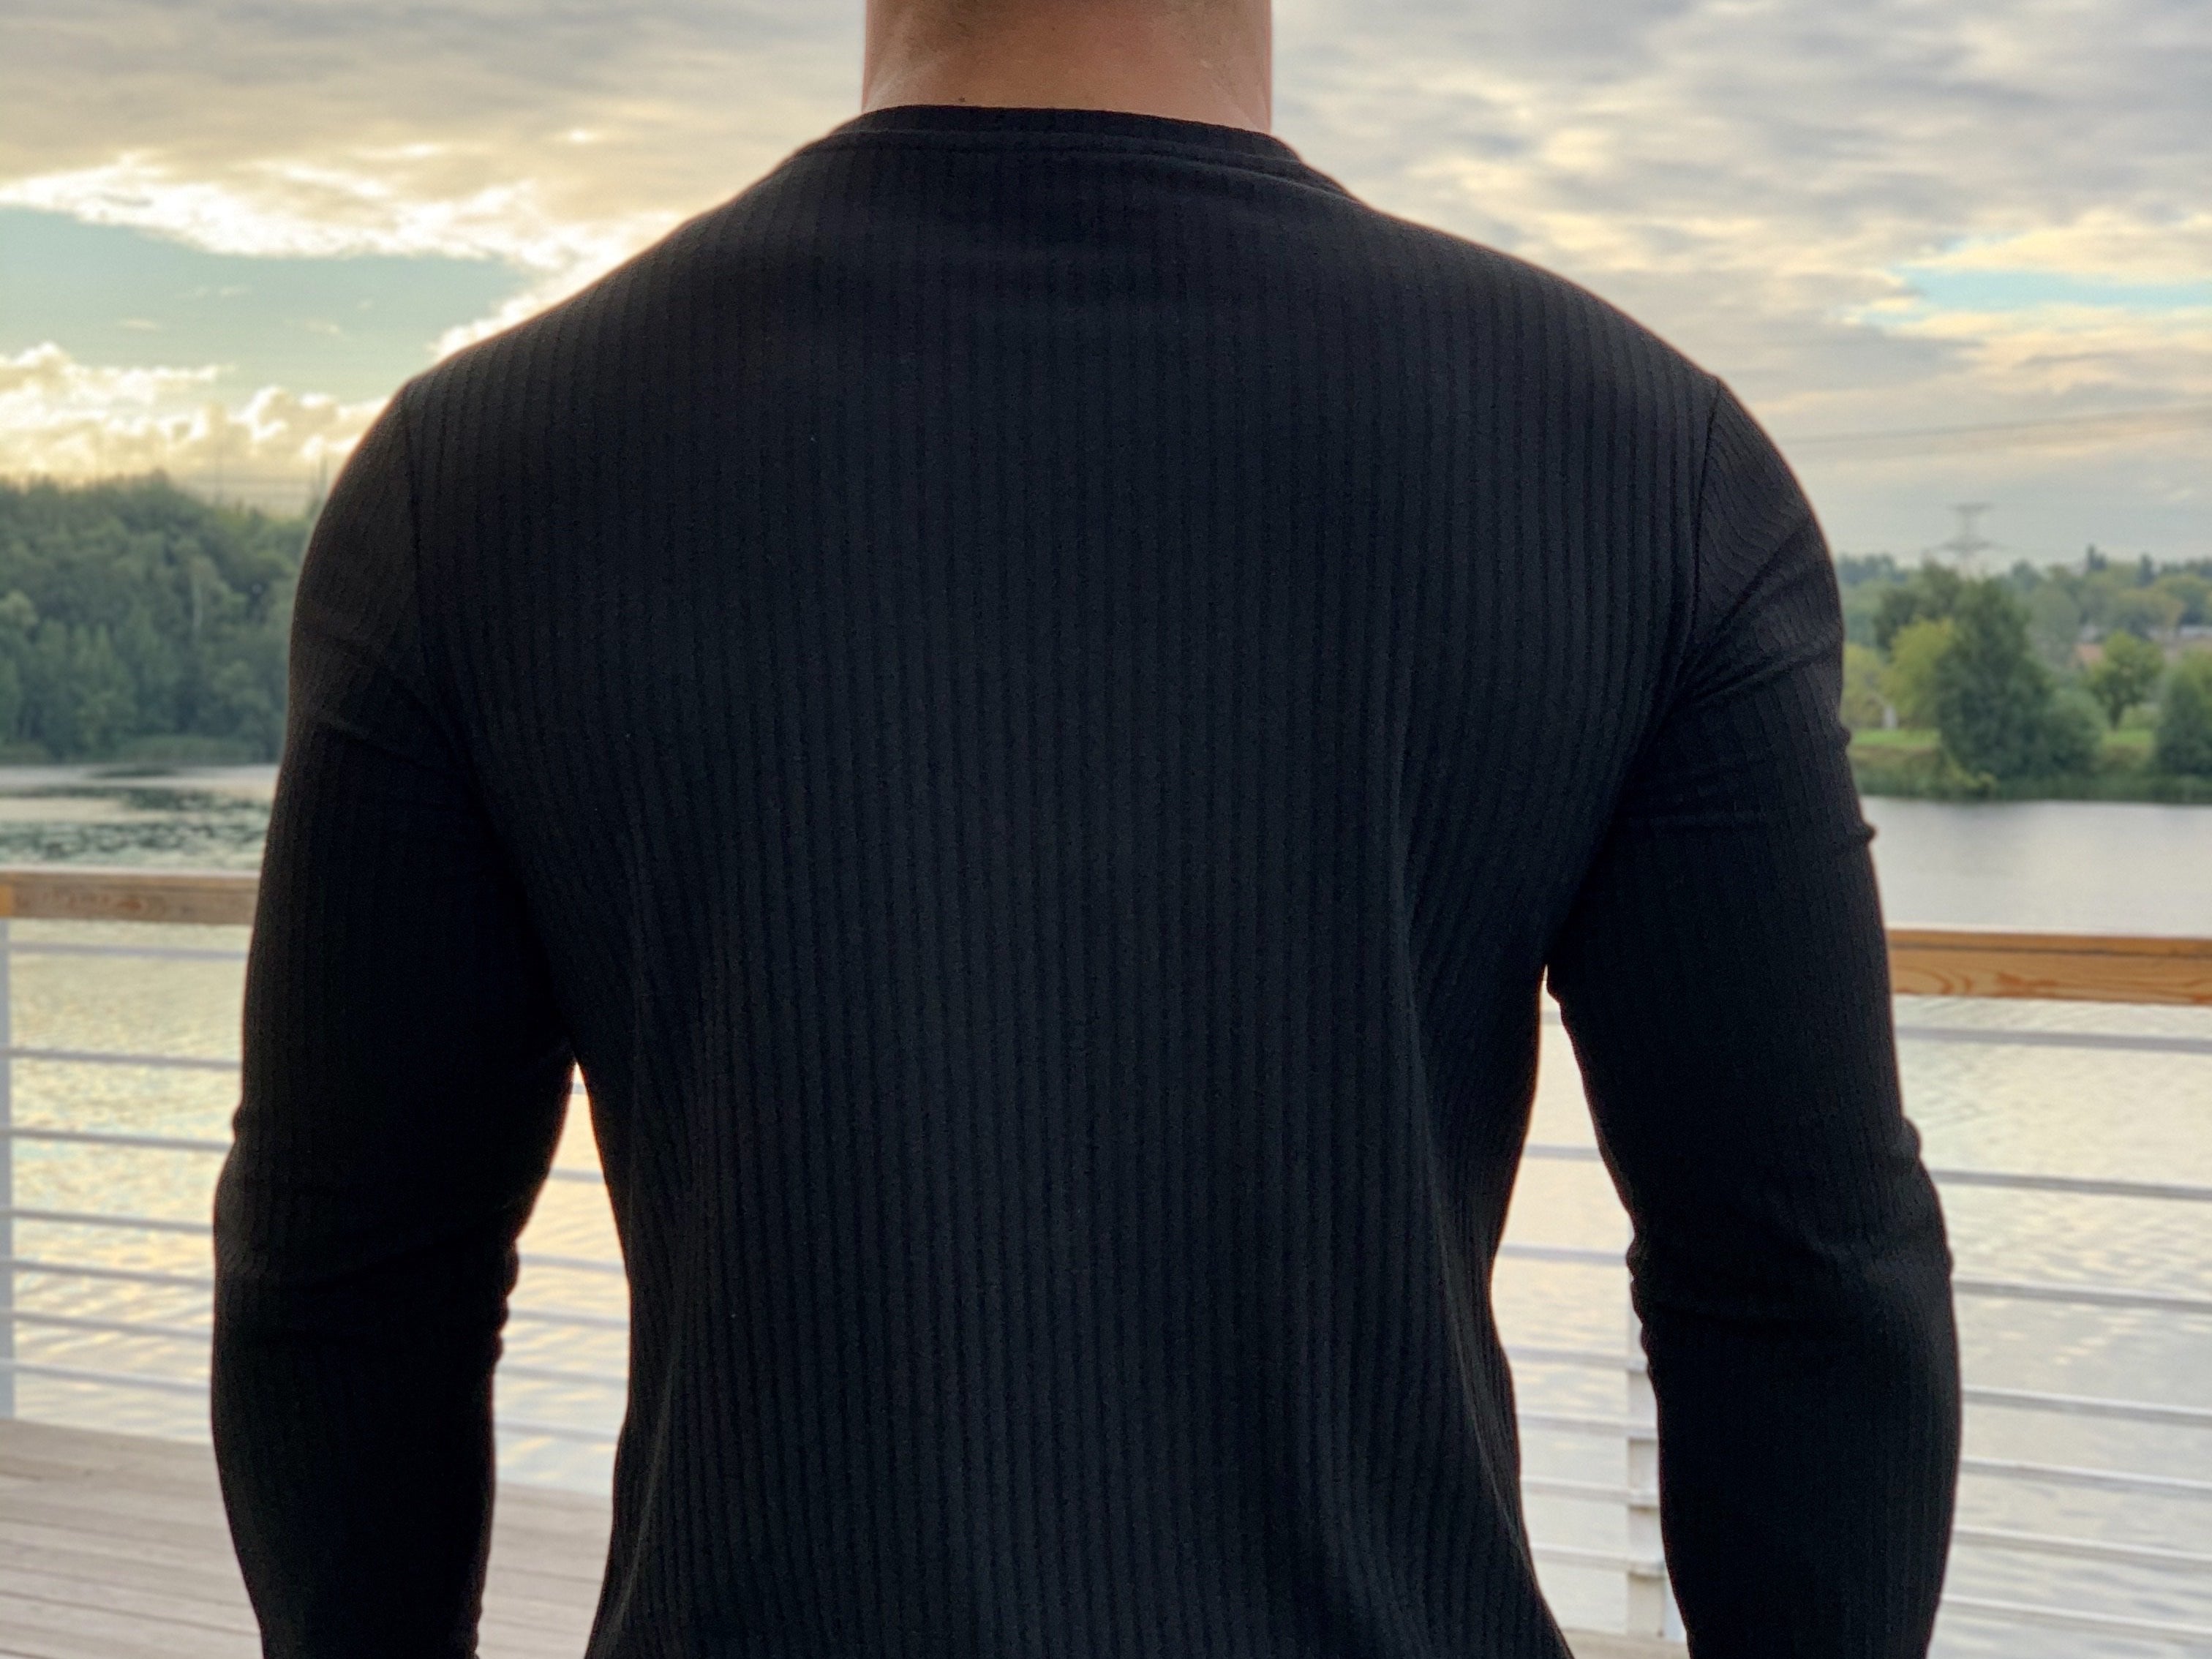 Base 1 - Black Long Sleeve Shirt for Men (PRE-ORDER DISPATCH DATE 25 SEPTEMBER) - Sarman Fashion - Wholesale Clothing Fashion Brand for Men from Canada